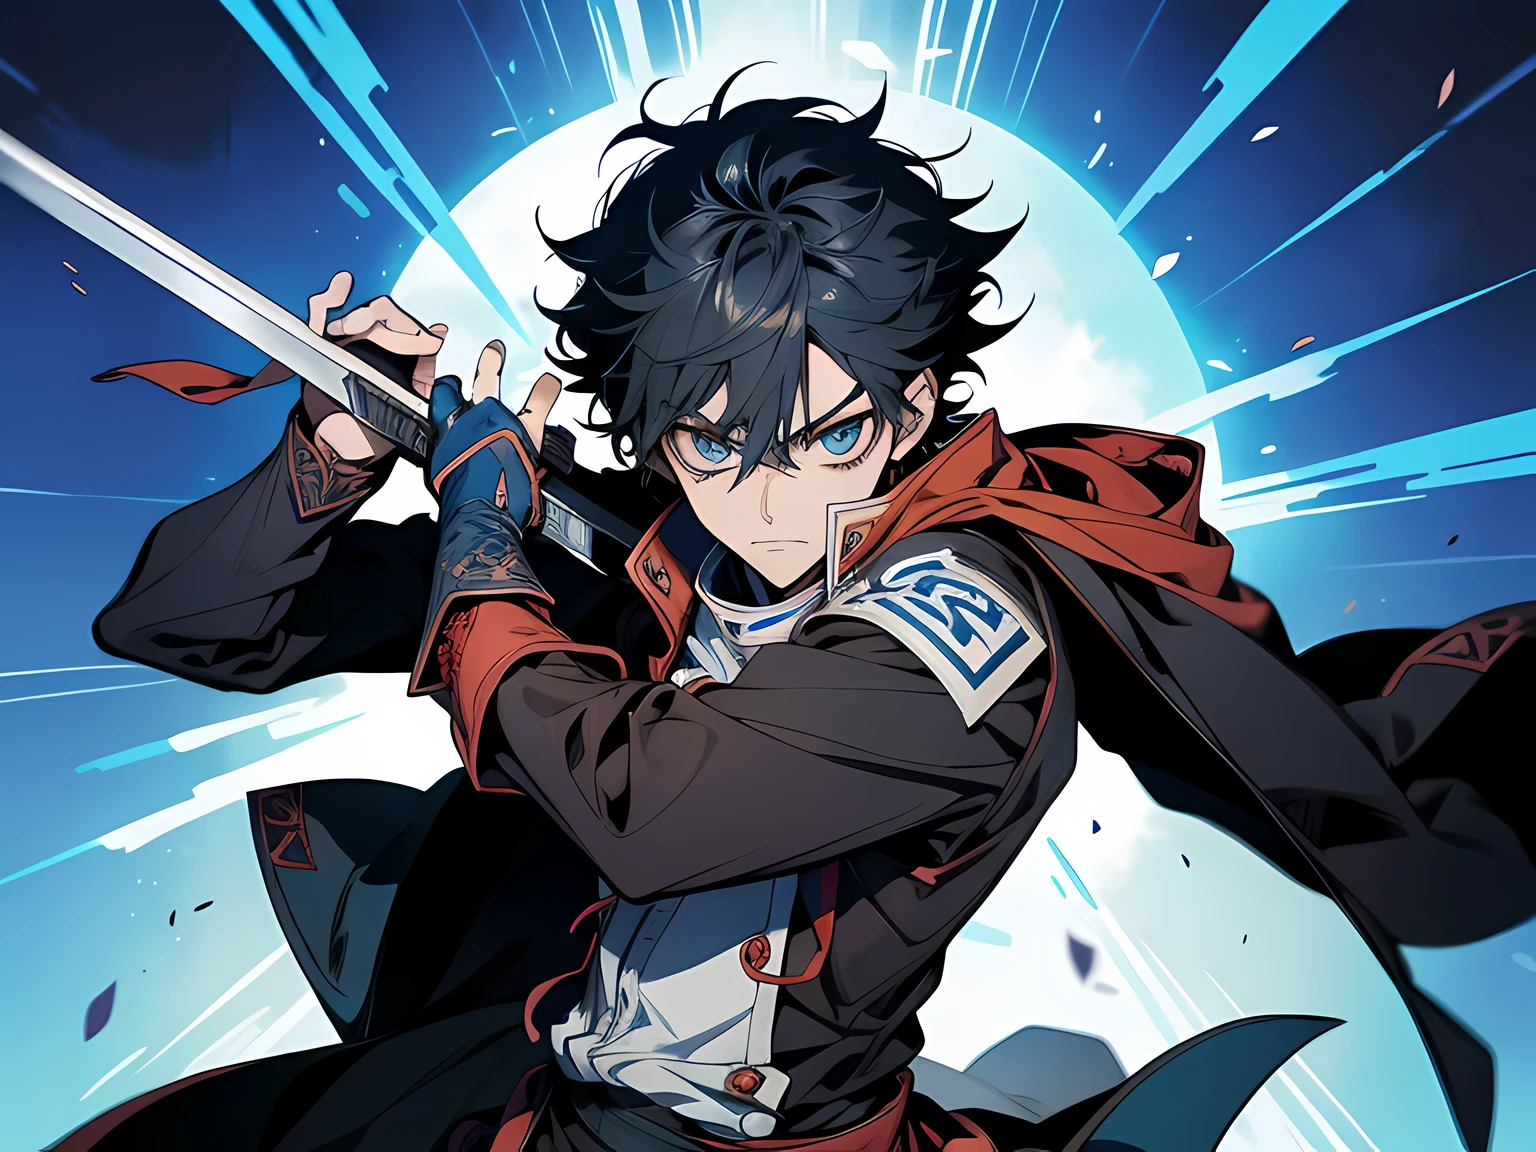 (1 man) anime character with sword in hand and blue background, trigger anime artstyle, tall anime guy with blue eyes, inspired by Okumura Masanobu, anime fencer, key anime art, an edgy teen assassin, demon slayer art, inspired by Okumura Togyu, kentaro miura manga art style, handsome anime pose